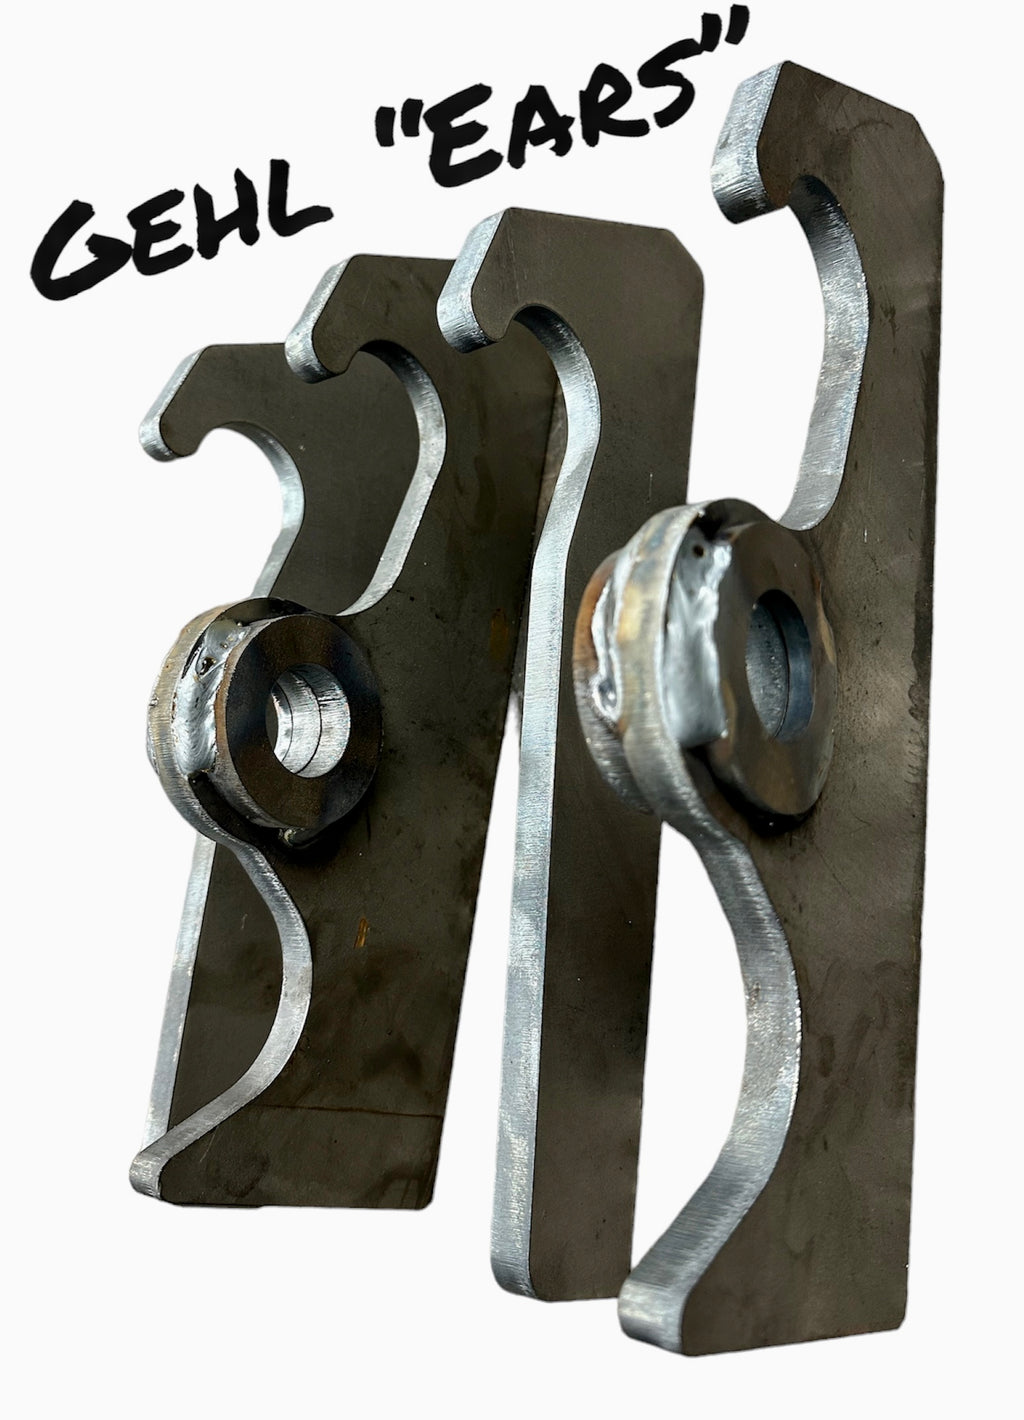 Gehl Mounting EARS for Models 4525, 4625, 5620, 5625, 6620 and 6625